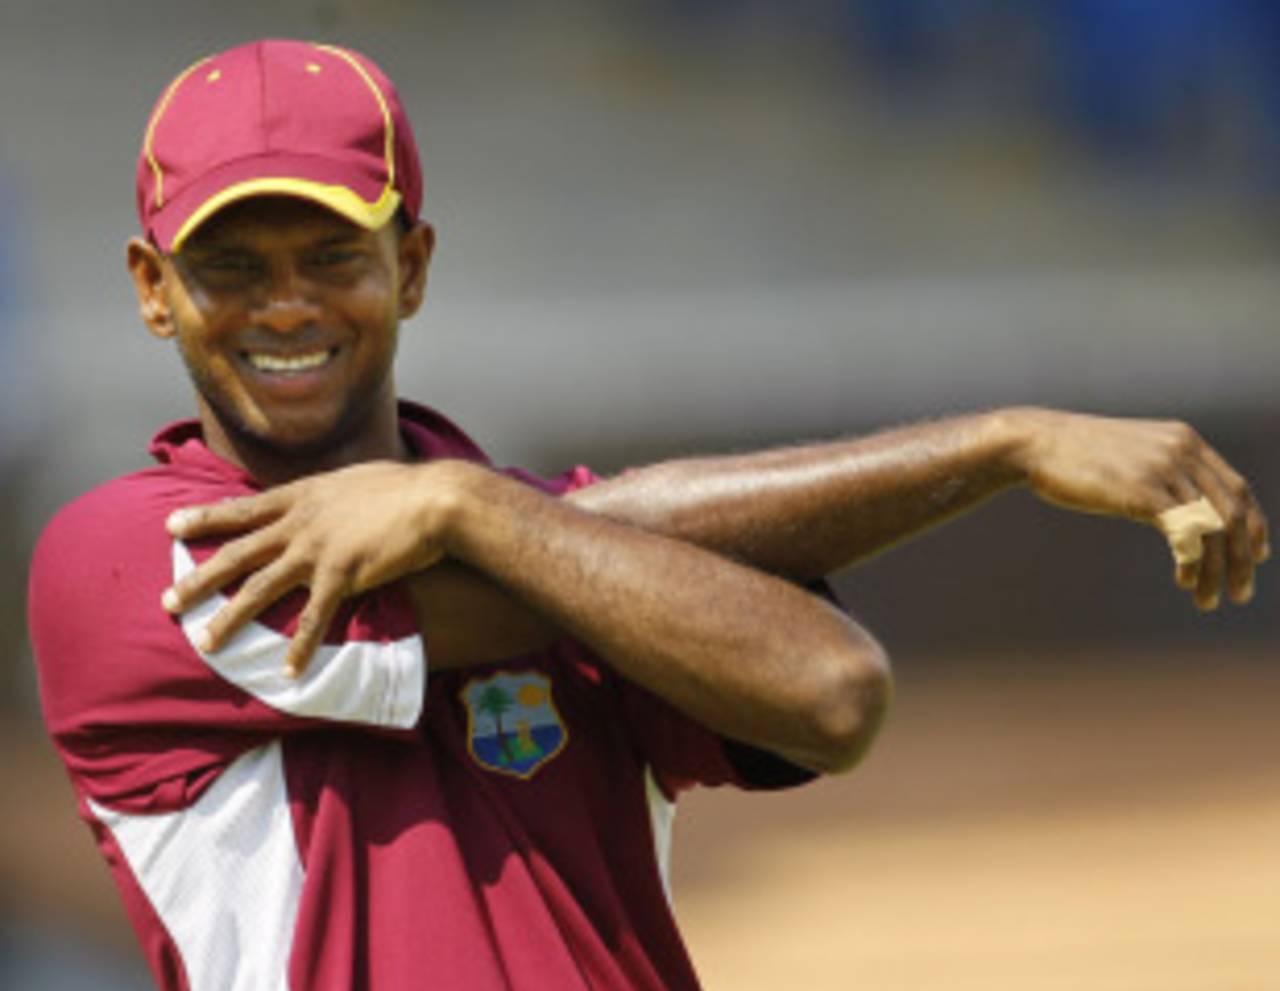 In a show of resilience and will power, Shiv Chanderpaul was able to write perfectly serviceable irate letters to the WICB despite two taped fingers&nbsp;&nbsp;&bull;&nbsp;&nbsp;Associated Press